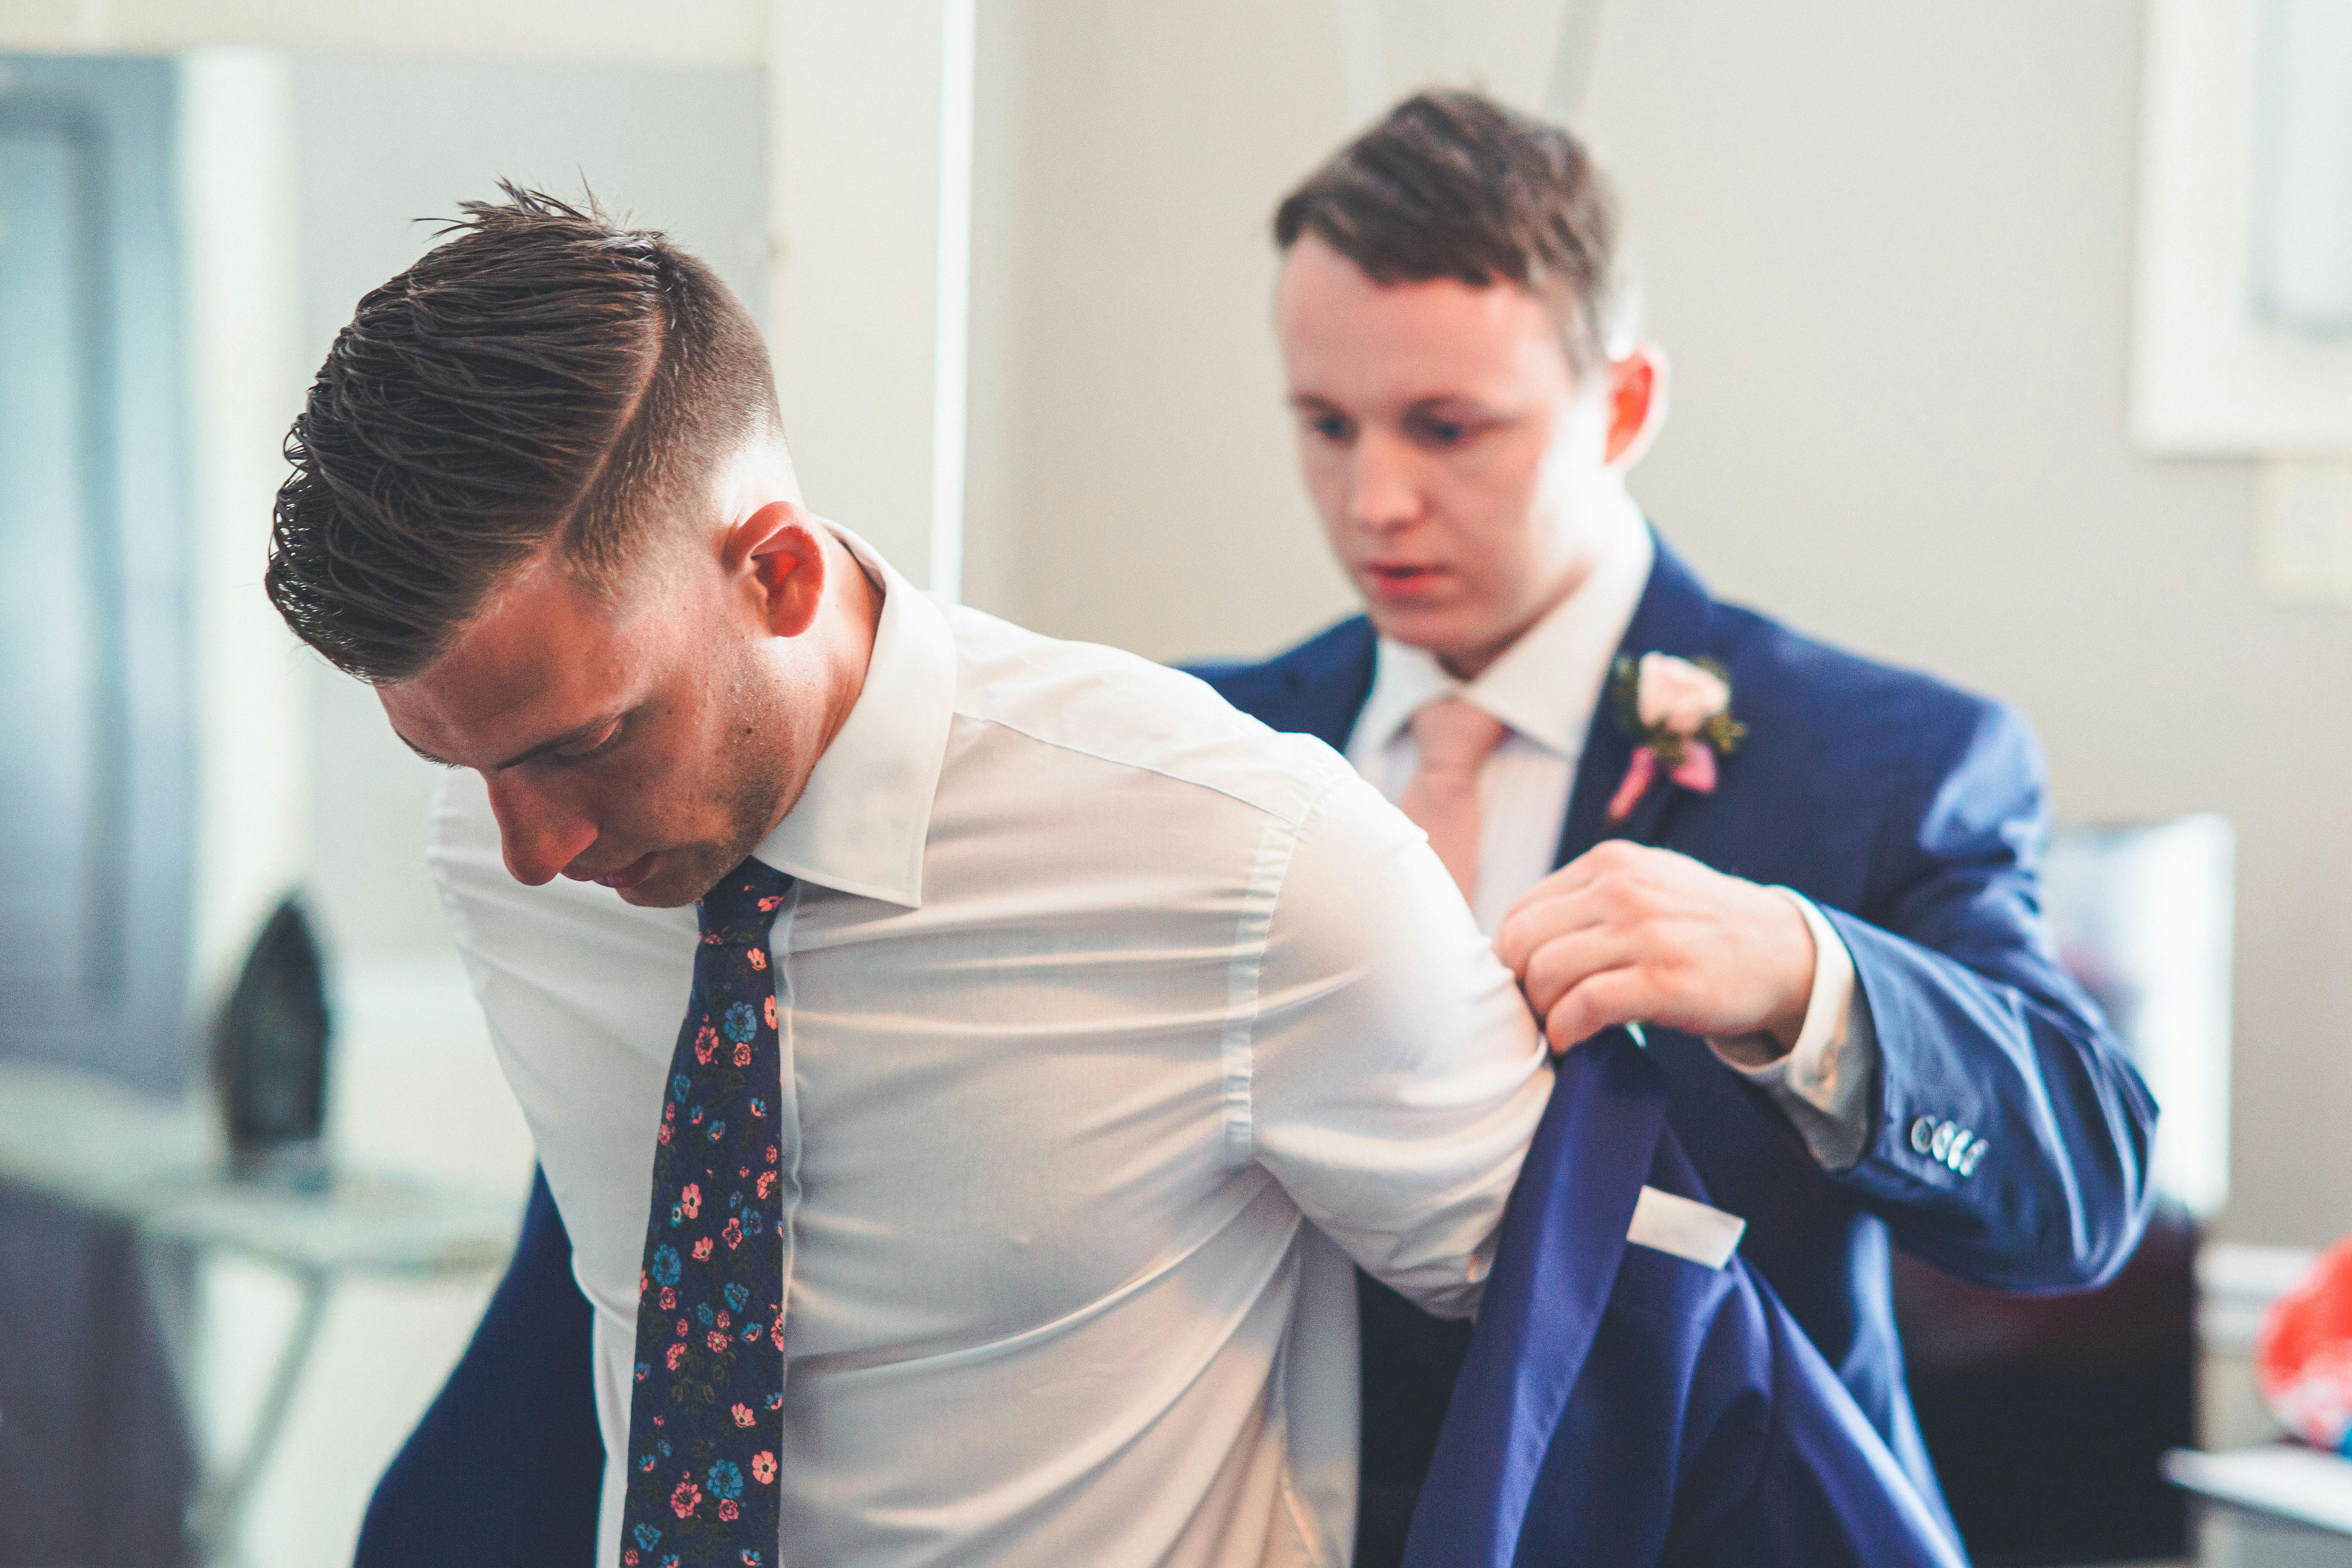 For illustration purposes only. Groomsman helps his brother put on his suit jacket | Source: Pexels